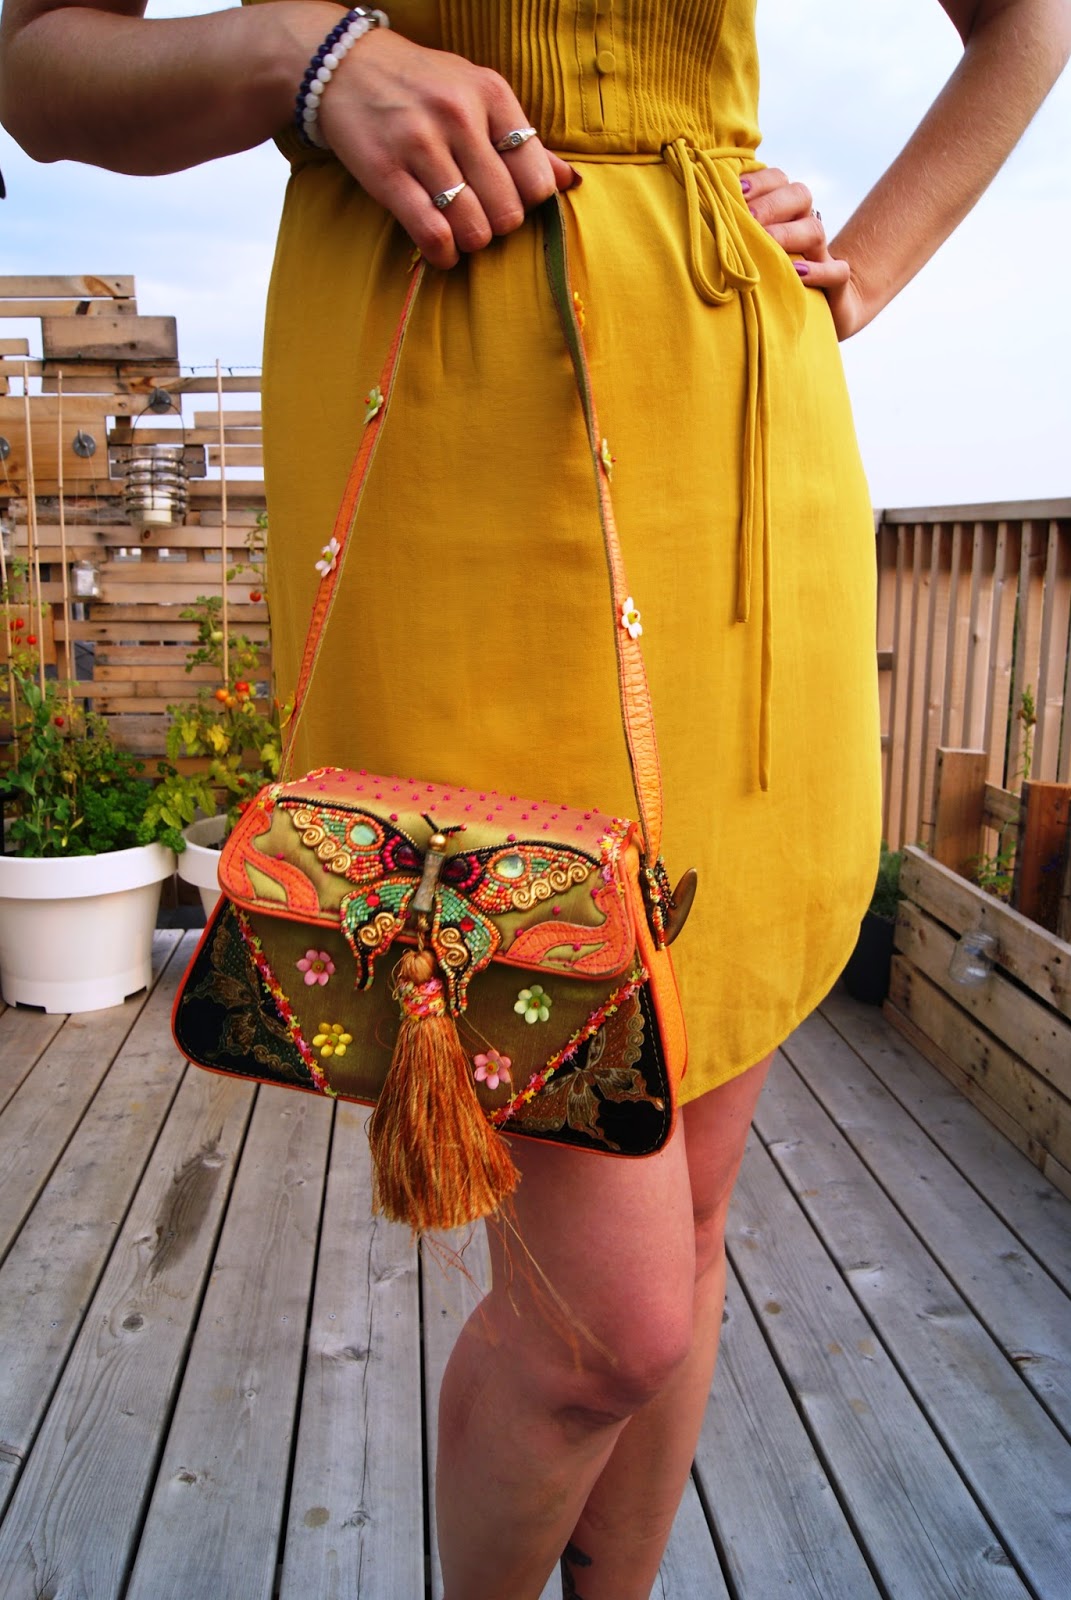 Mustard Yellow Warmth!: H&M Dress, Mary Frances Purse, Jessica Shoes from Sears, Shop For Jayu Necklace, Fall, Summer, Trend, OOTD, Outfit, fashion, style, styletips, thepurplescarf, melanie.ps, toronto,ontario, canada